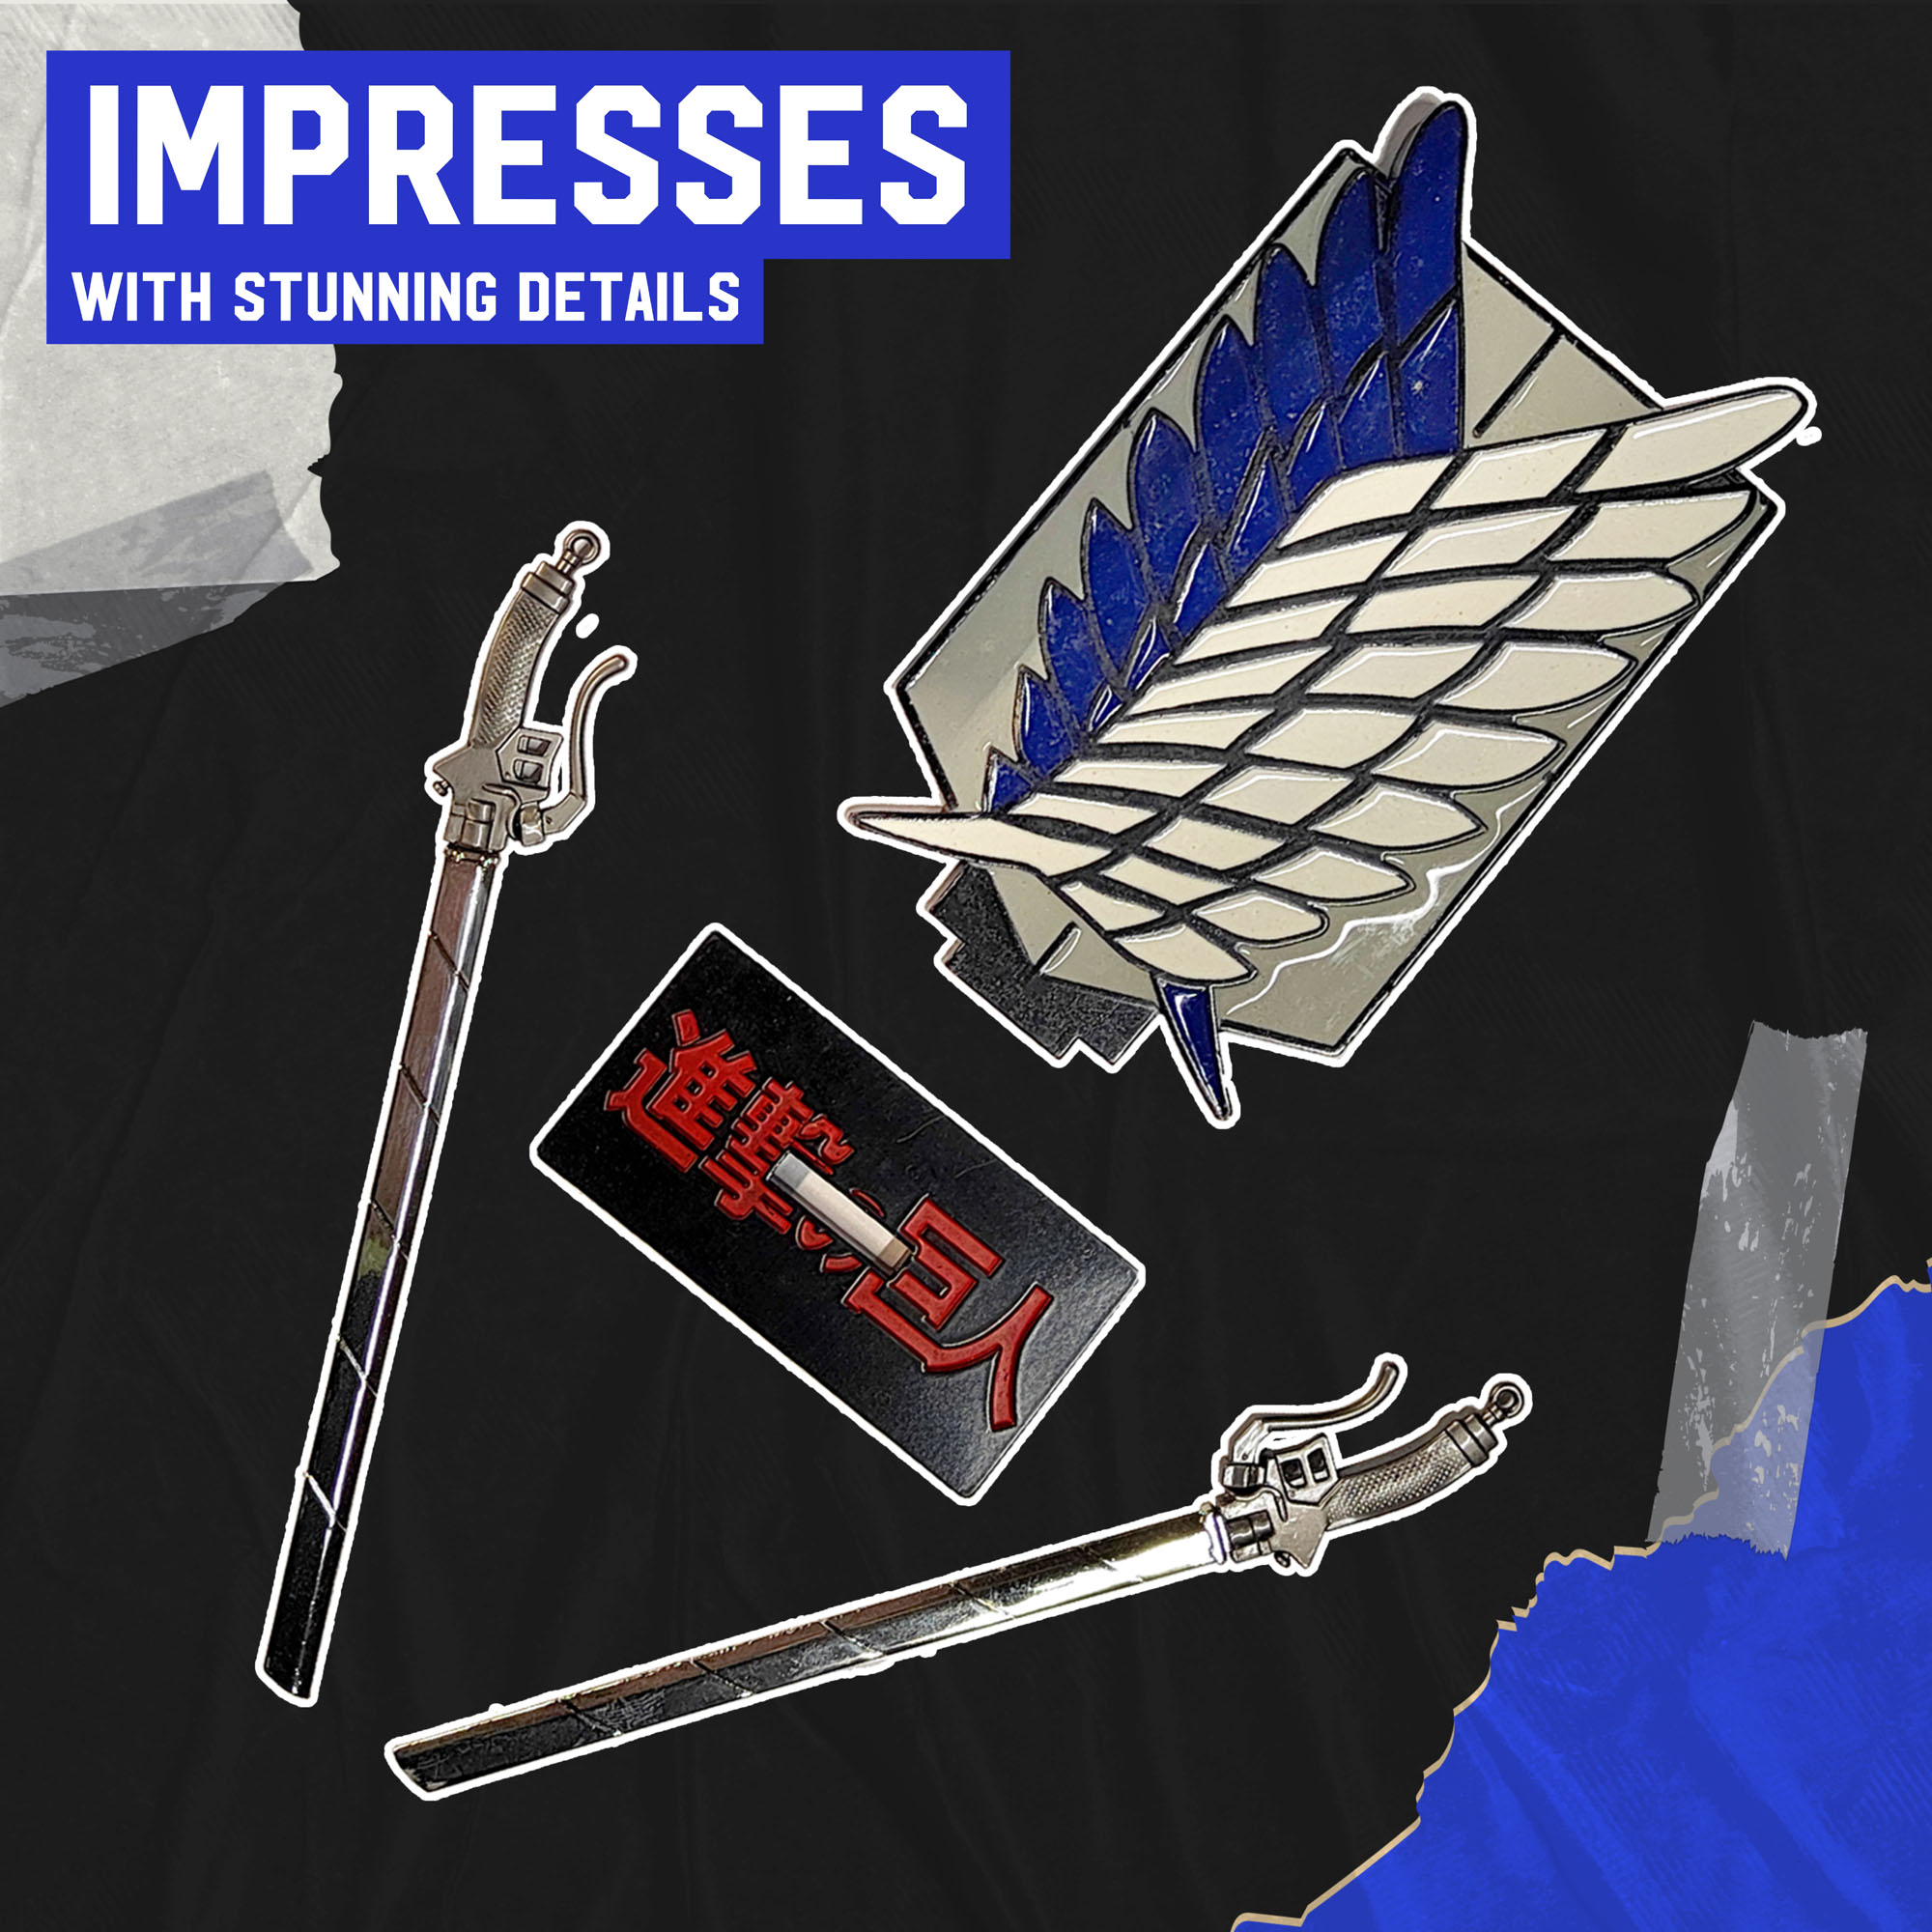 Attack on Titan – Dual ODM Gear Blade Letter Opener Swords with Wings of Freedom Stand